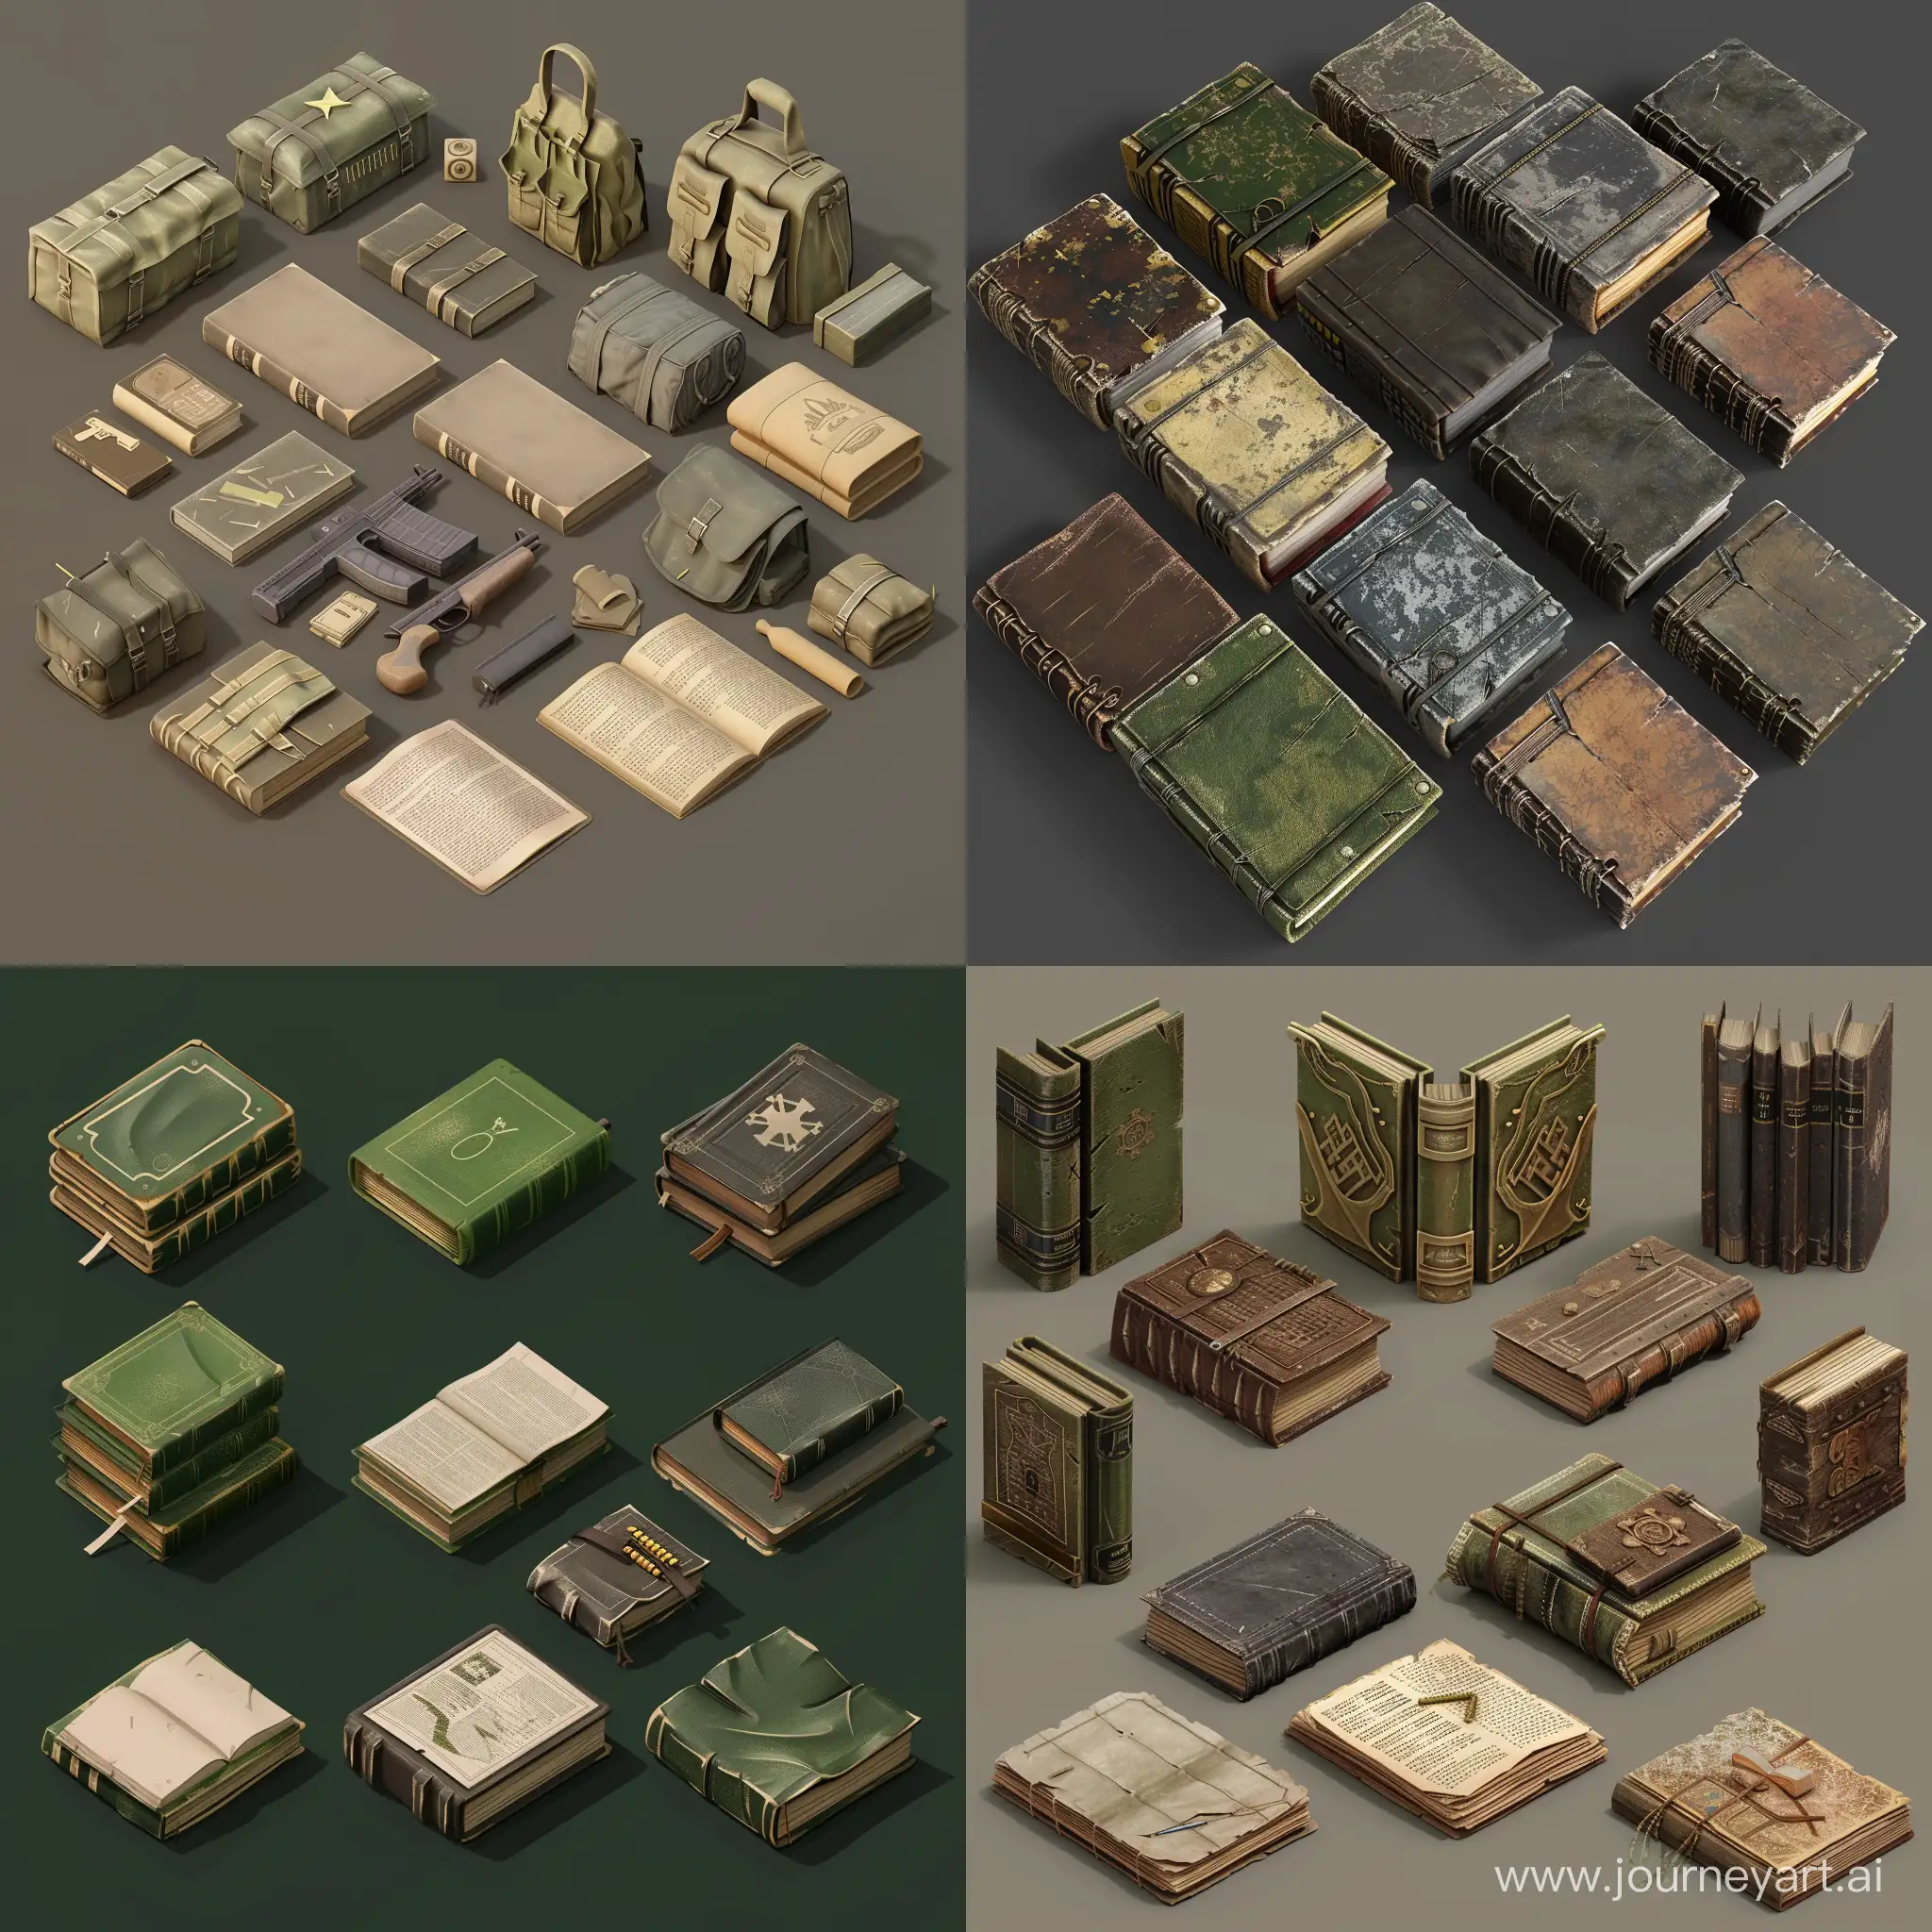 Isometric-Old-Military-Book-Set-in-Stalker-Style-3D-Render